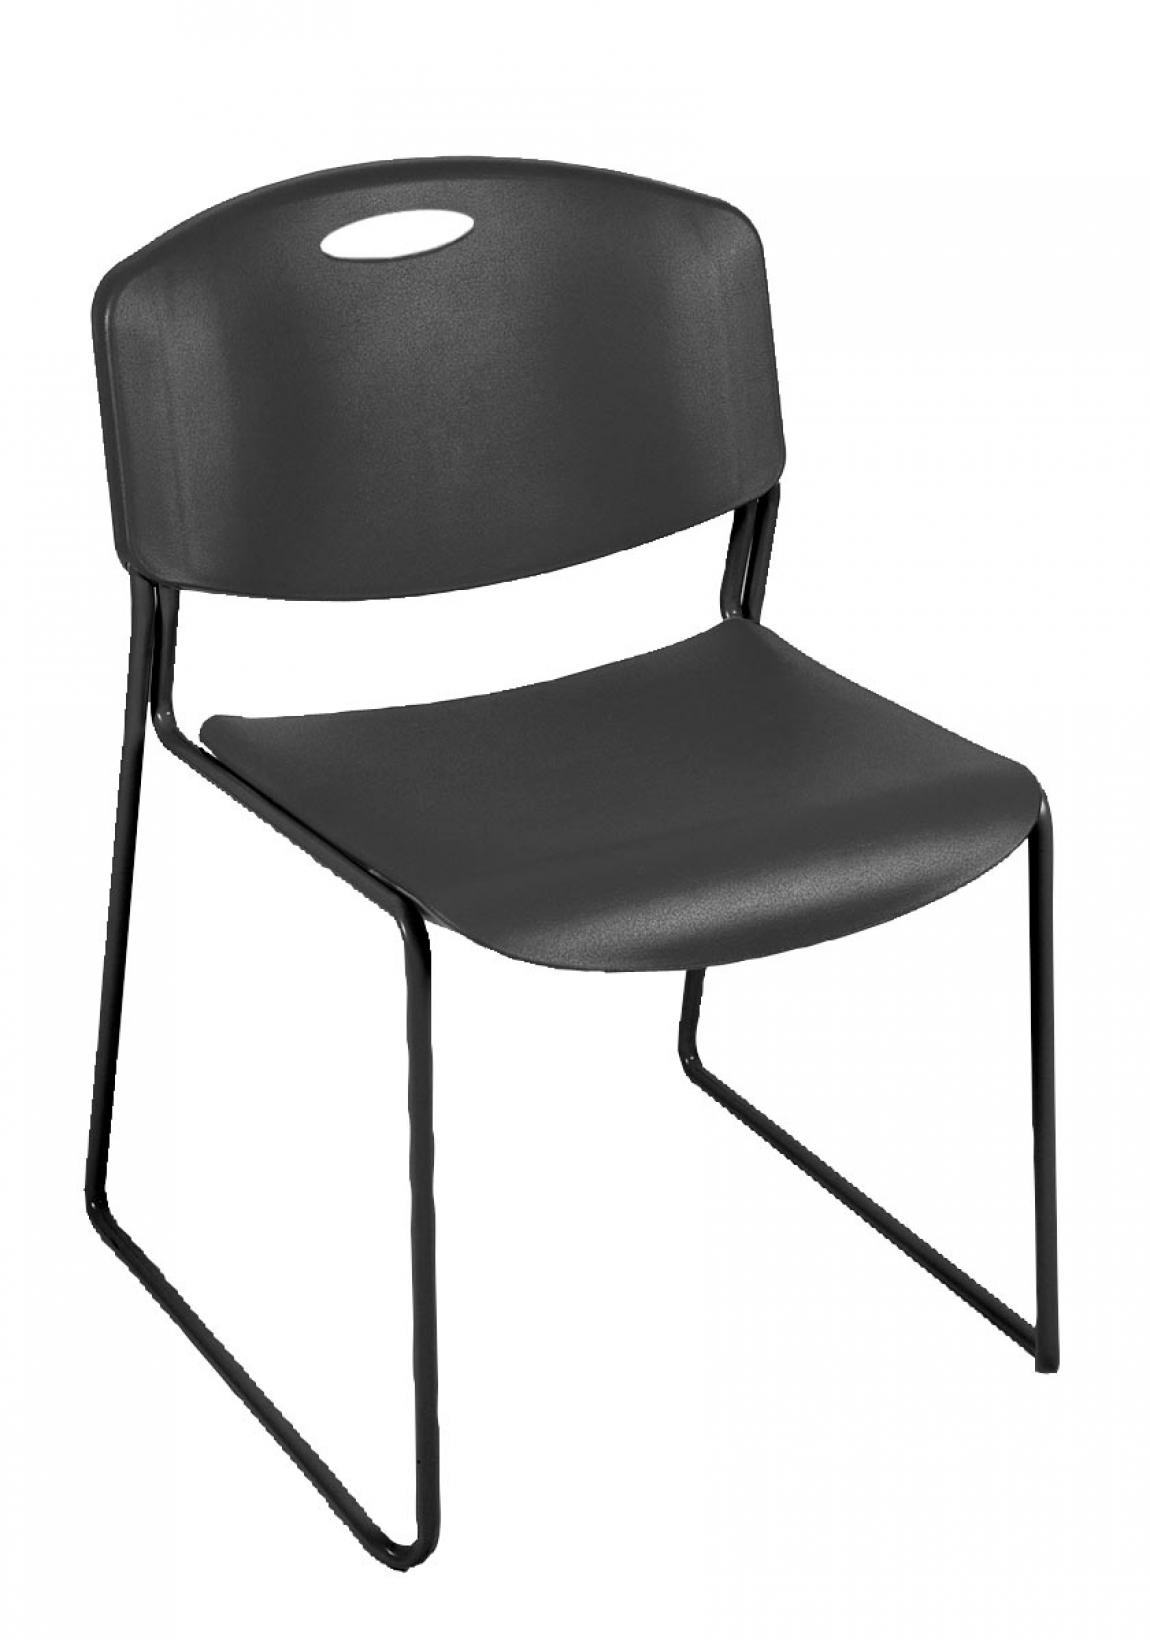 Heavy Duty Plastic Stacking Guest Chair 400 Lbs